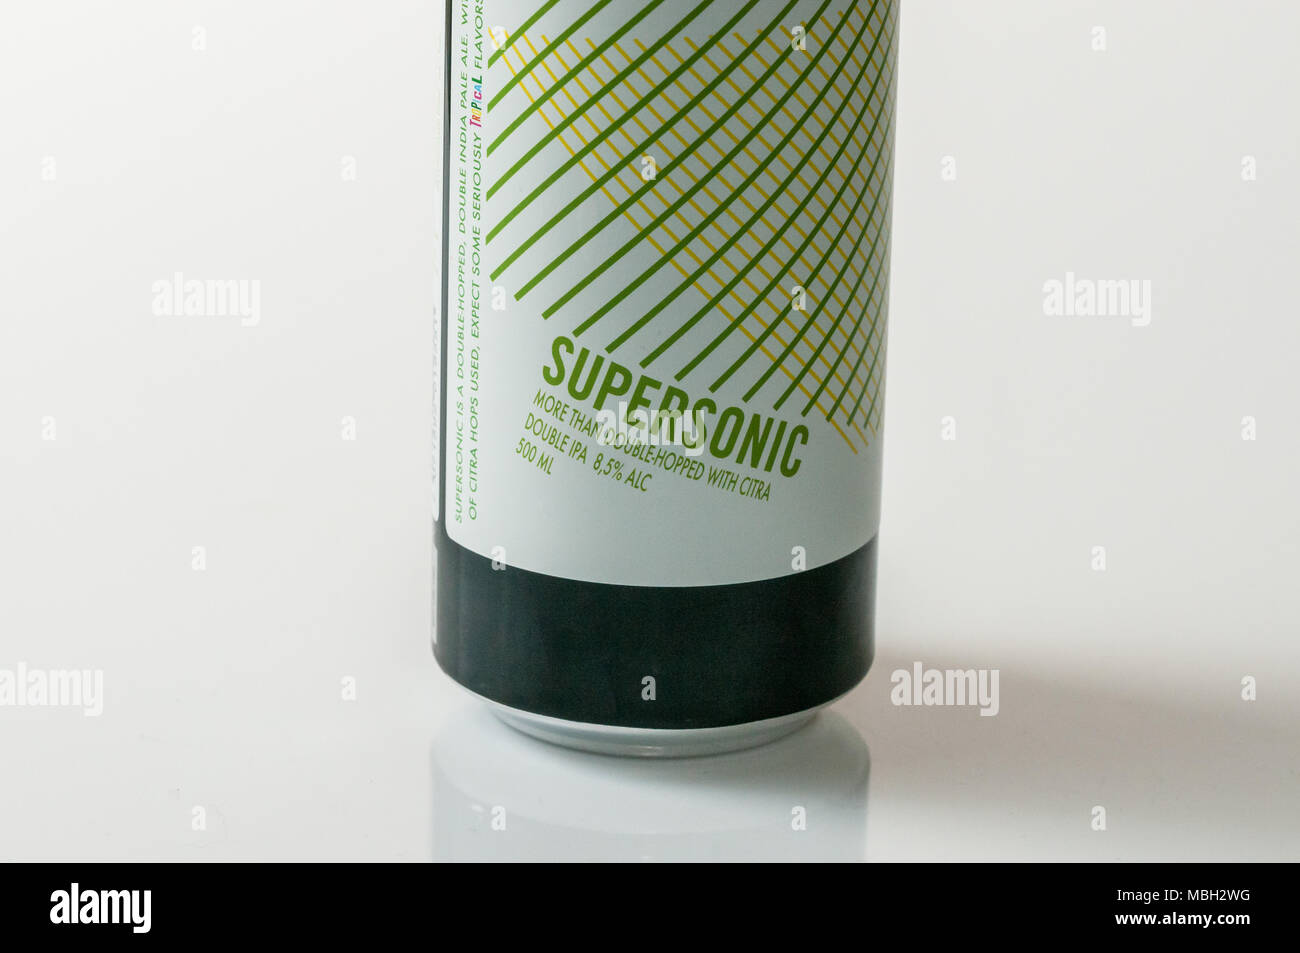 supersonic double ipa beer can, LERVIG brewery Stock Photo